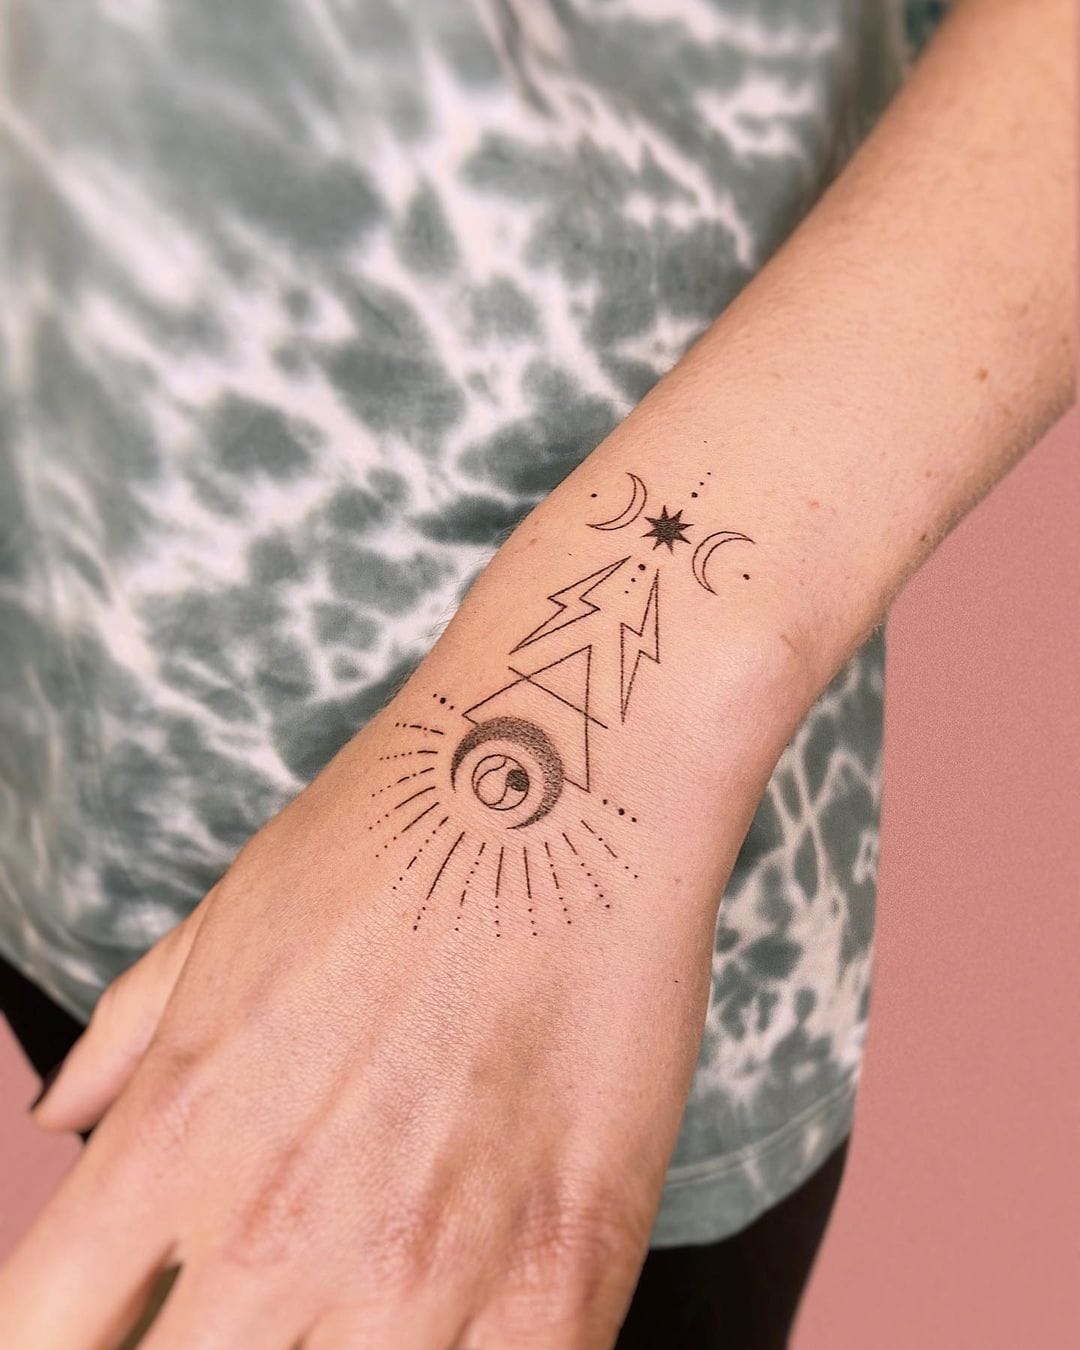 Delicate Constellation Tattoos Based on Your Zodiac Sign